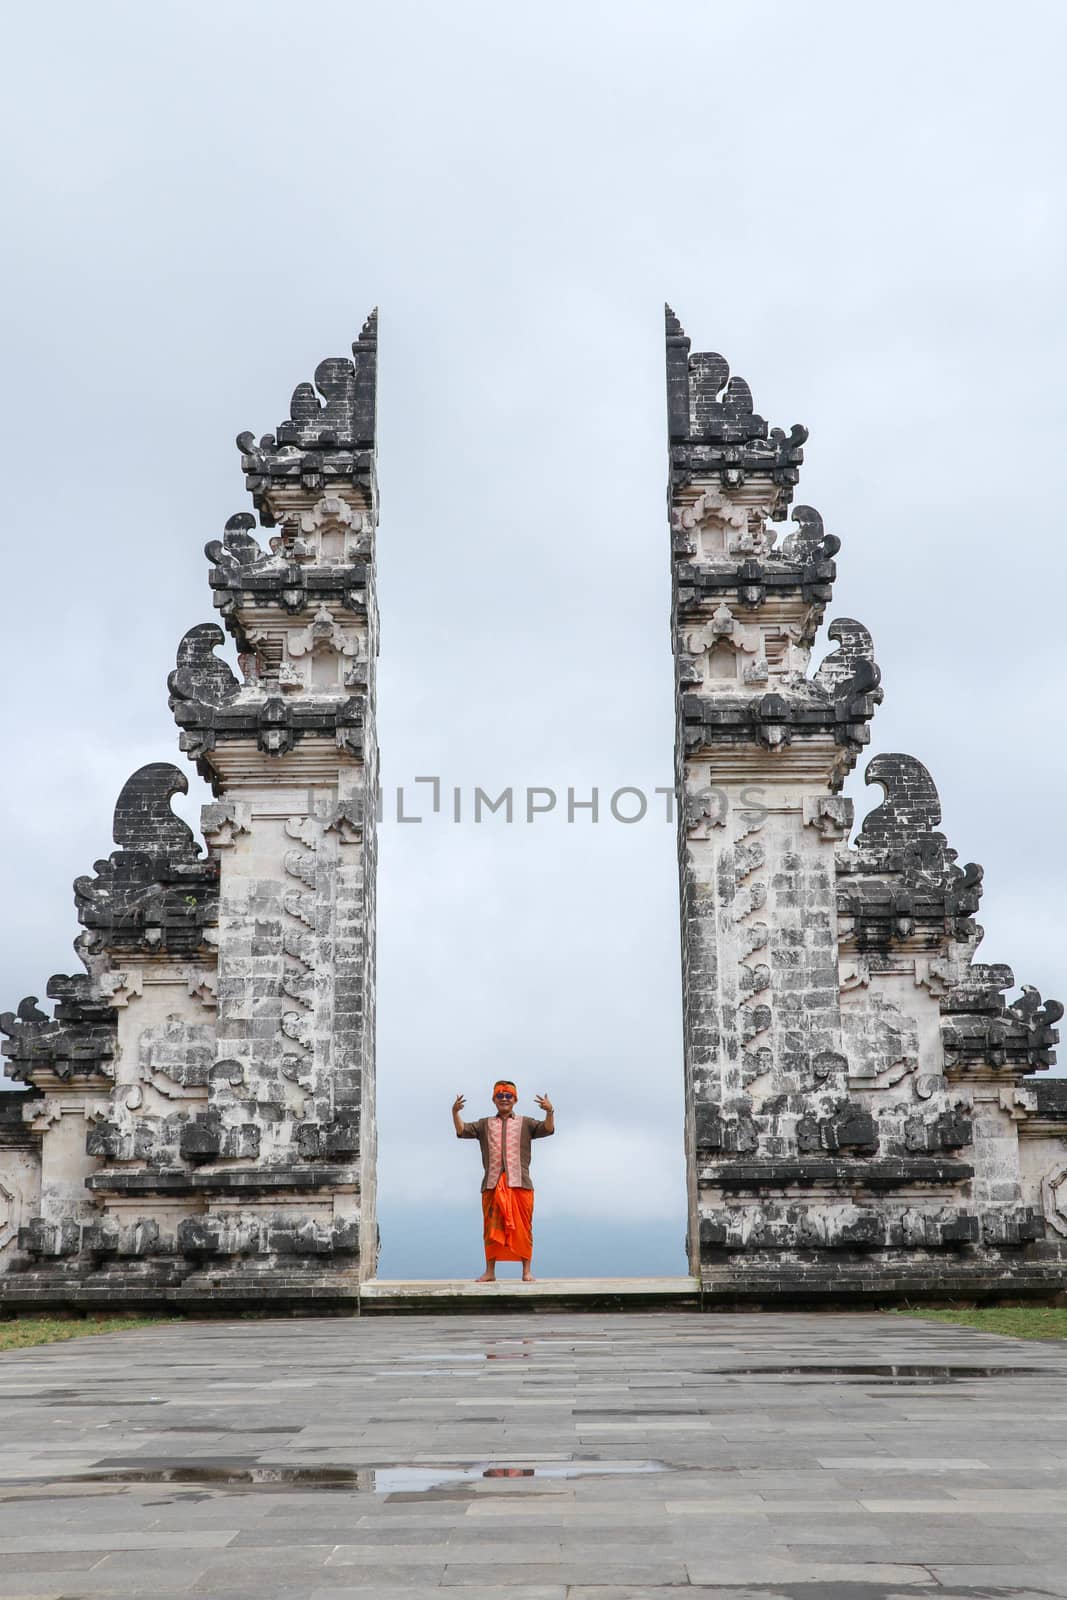 Man is standing in the gate of Lempuyang temple on Bali isalnd, Indonesia.